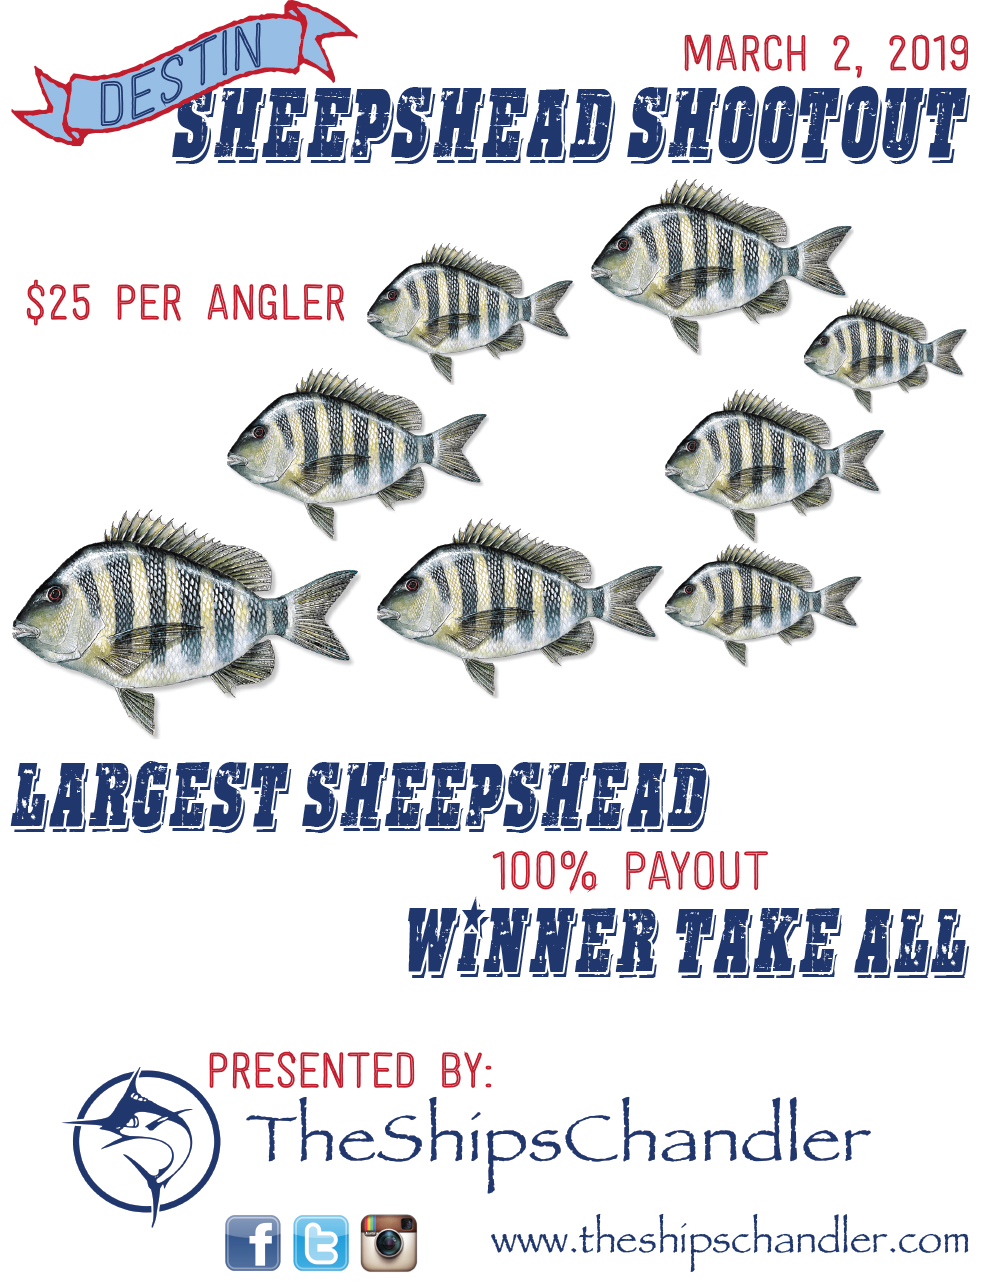 Sheepshead Shootout 2019 Poster - Sponsored by The Ships Chandler